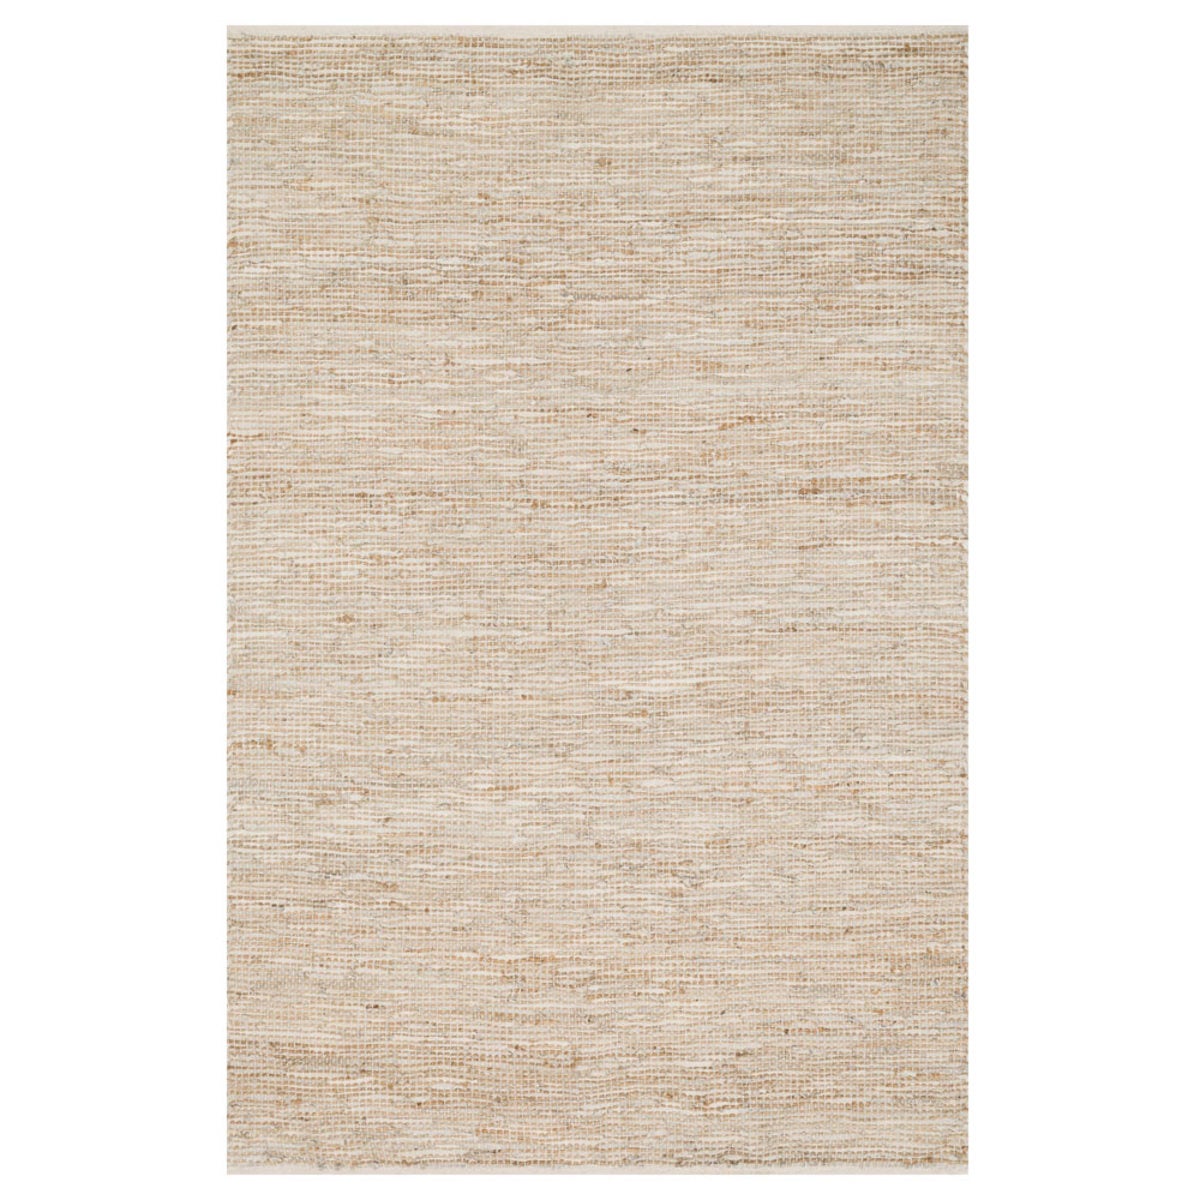 Loloi Edge Leather & Jute Rug in Brown - 5' x 7'6"  - Ivory